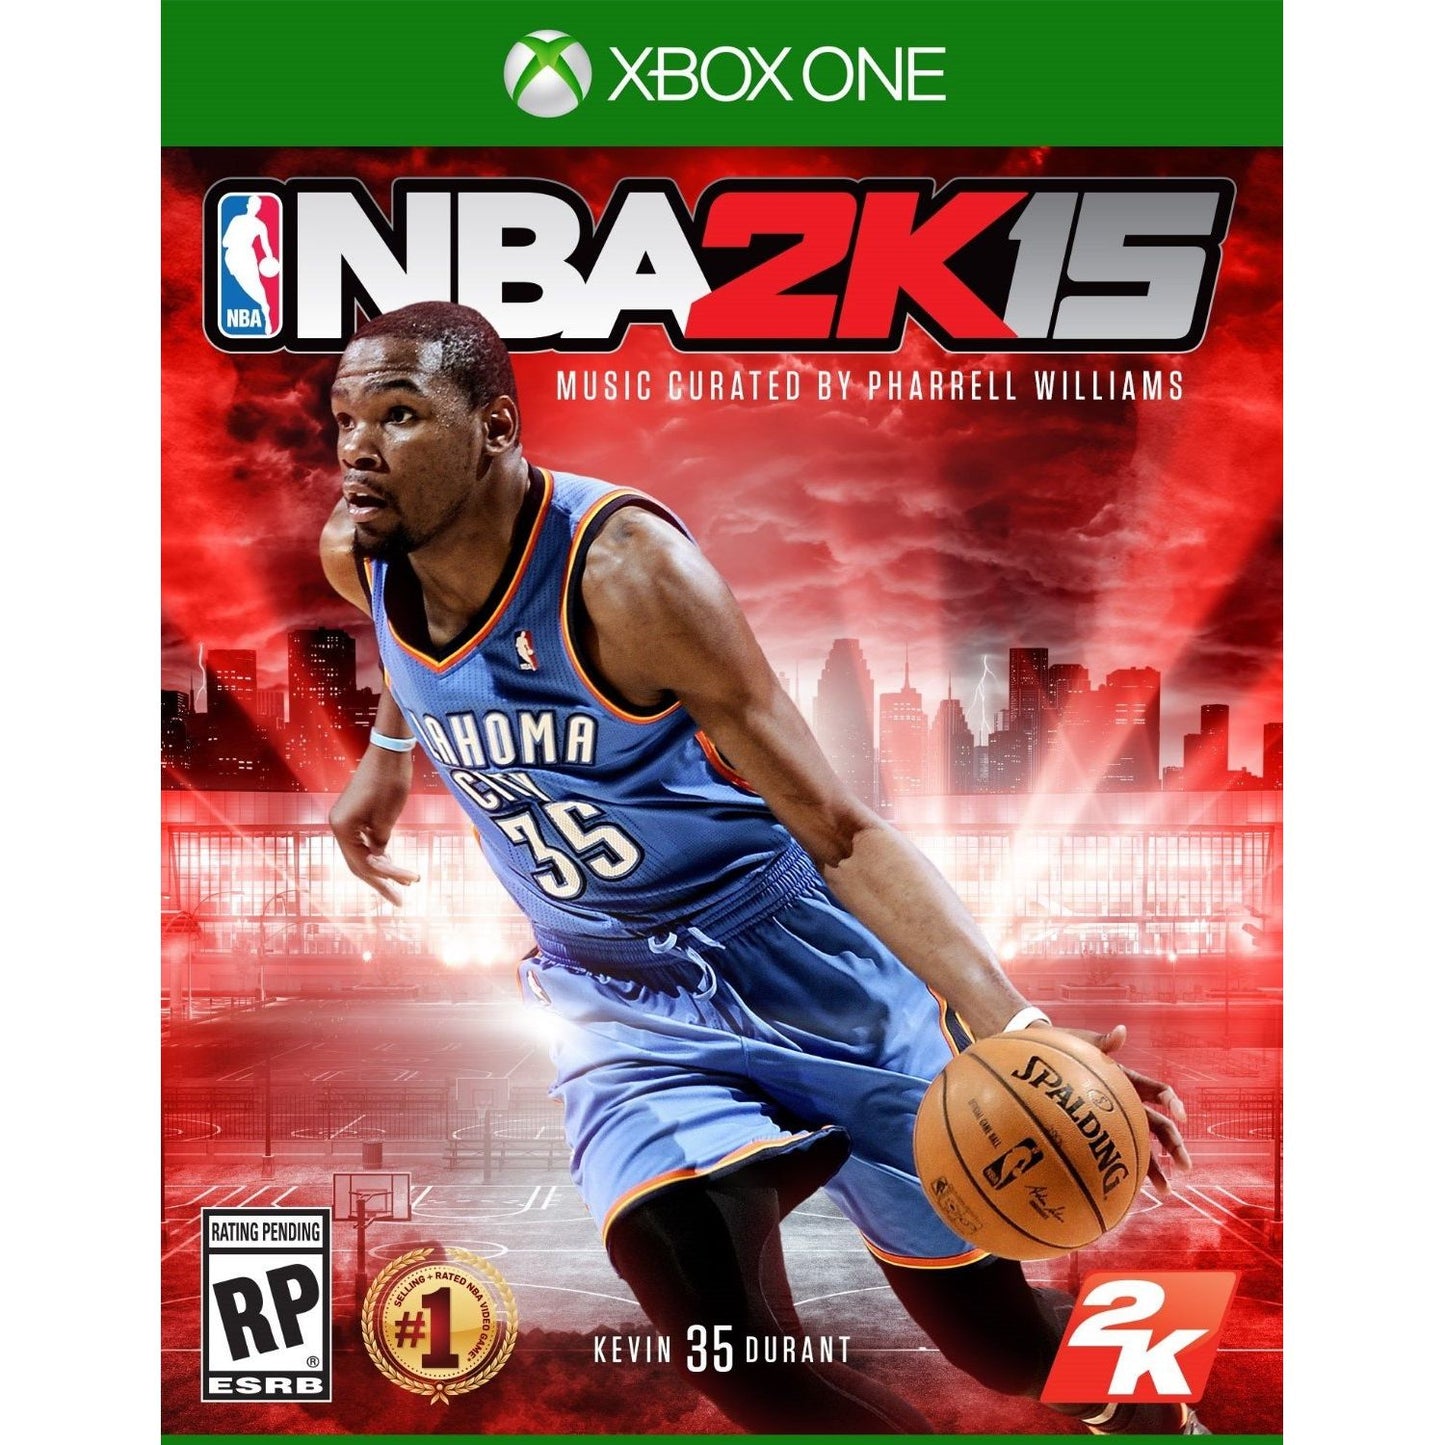 NBA 2K15 (NOT AVAILABLE FOR TRADE-IN) (used)